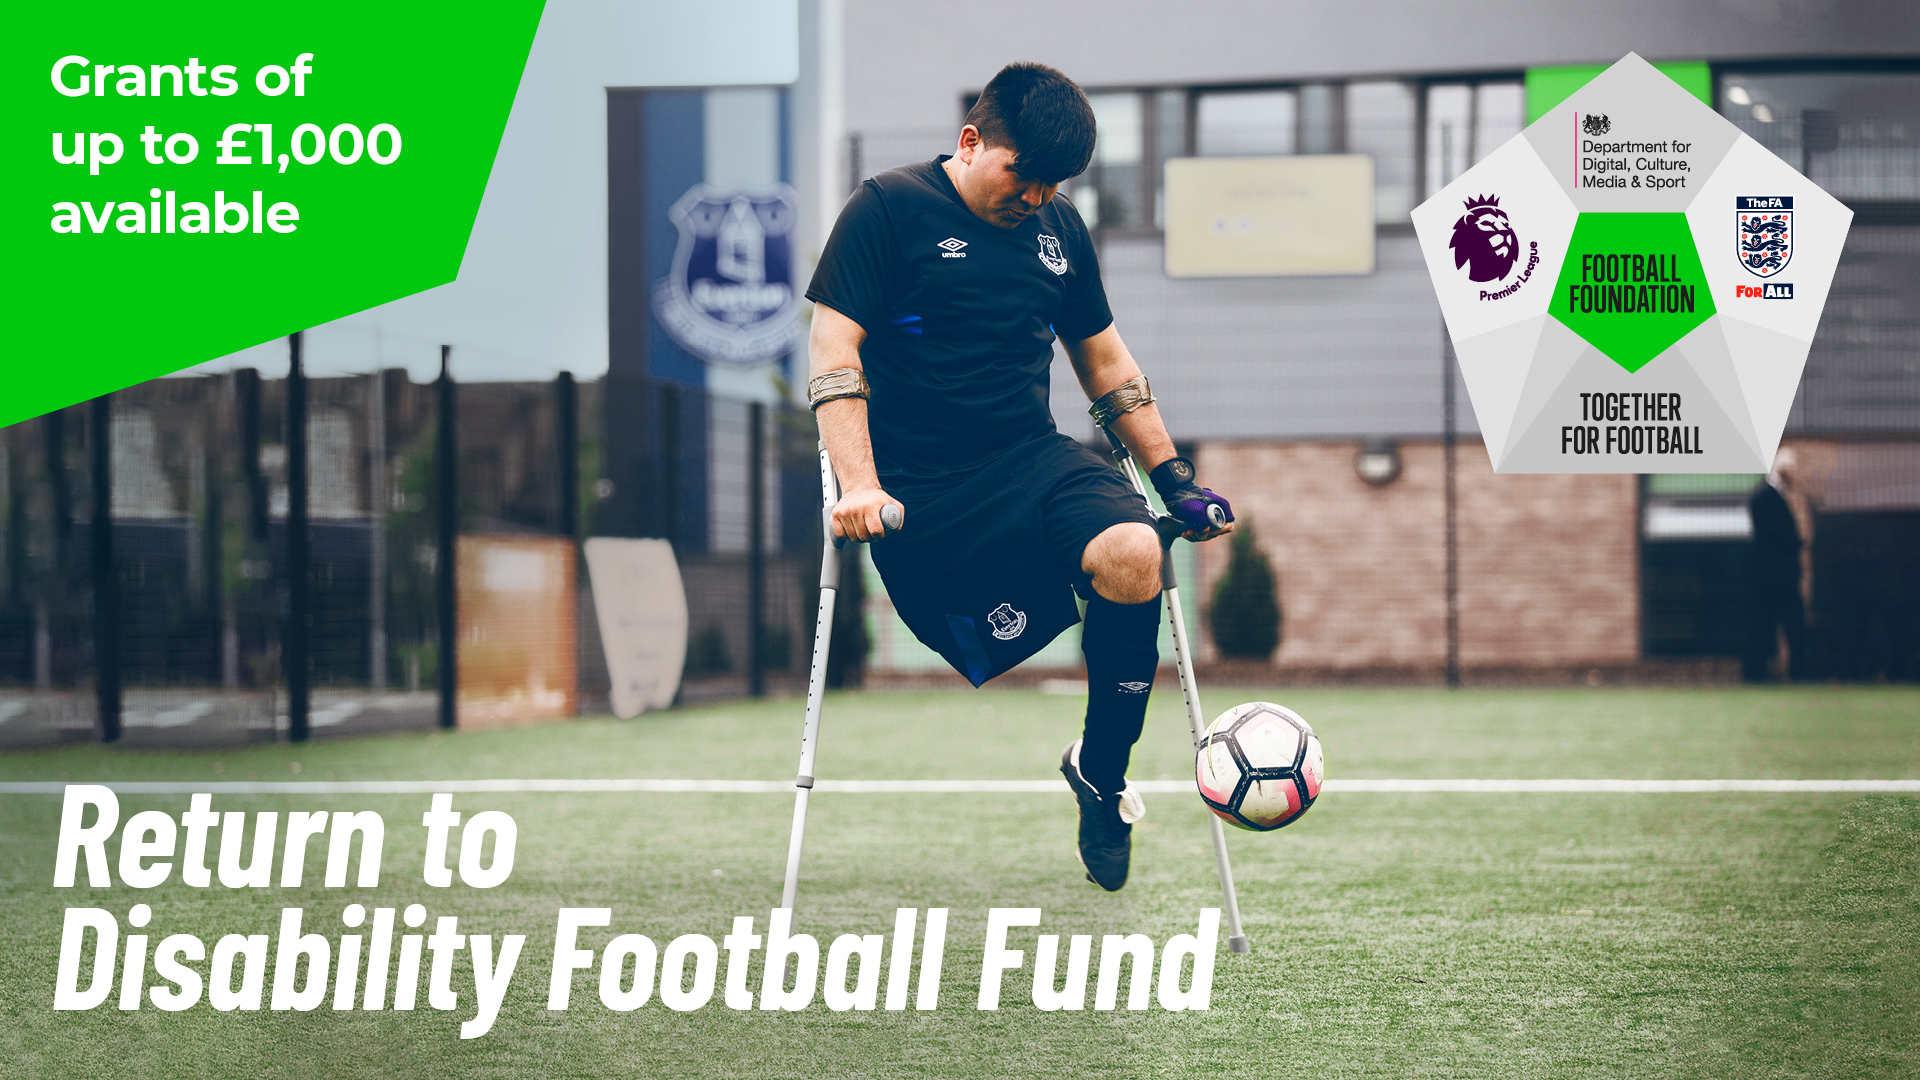 Return to Disability Football Fund